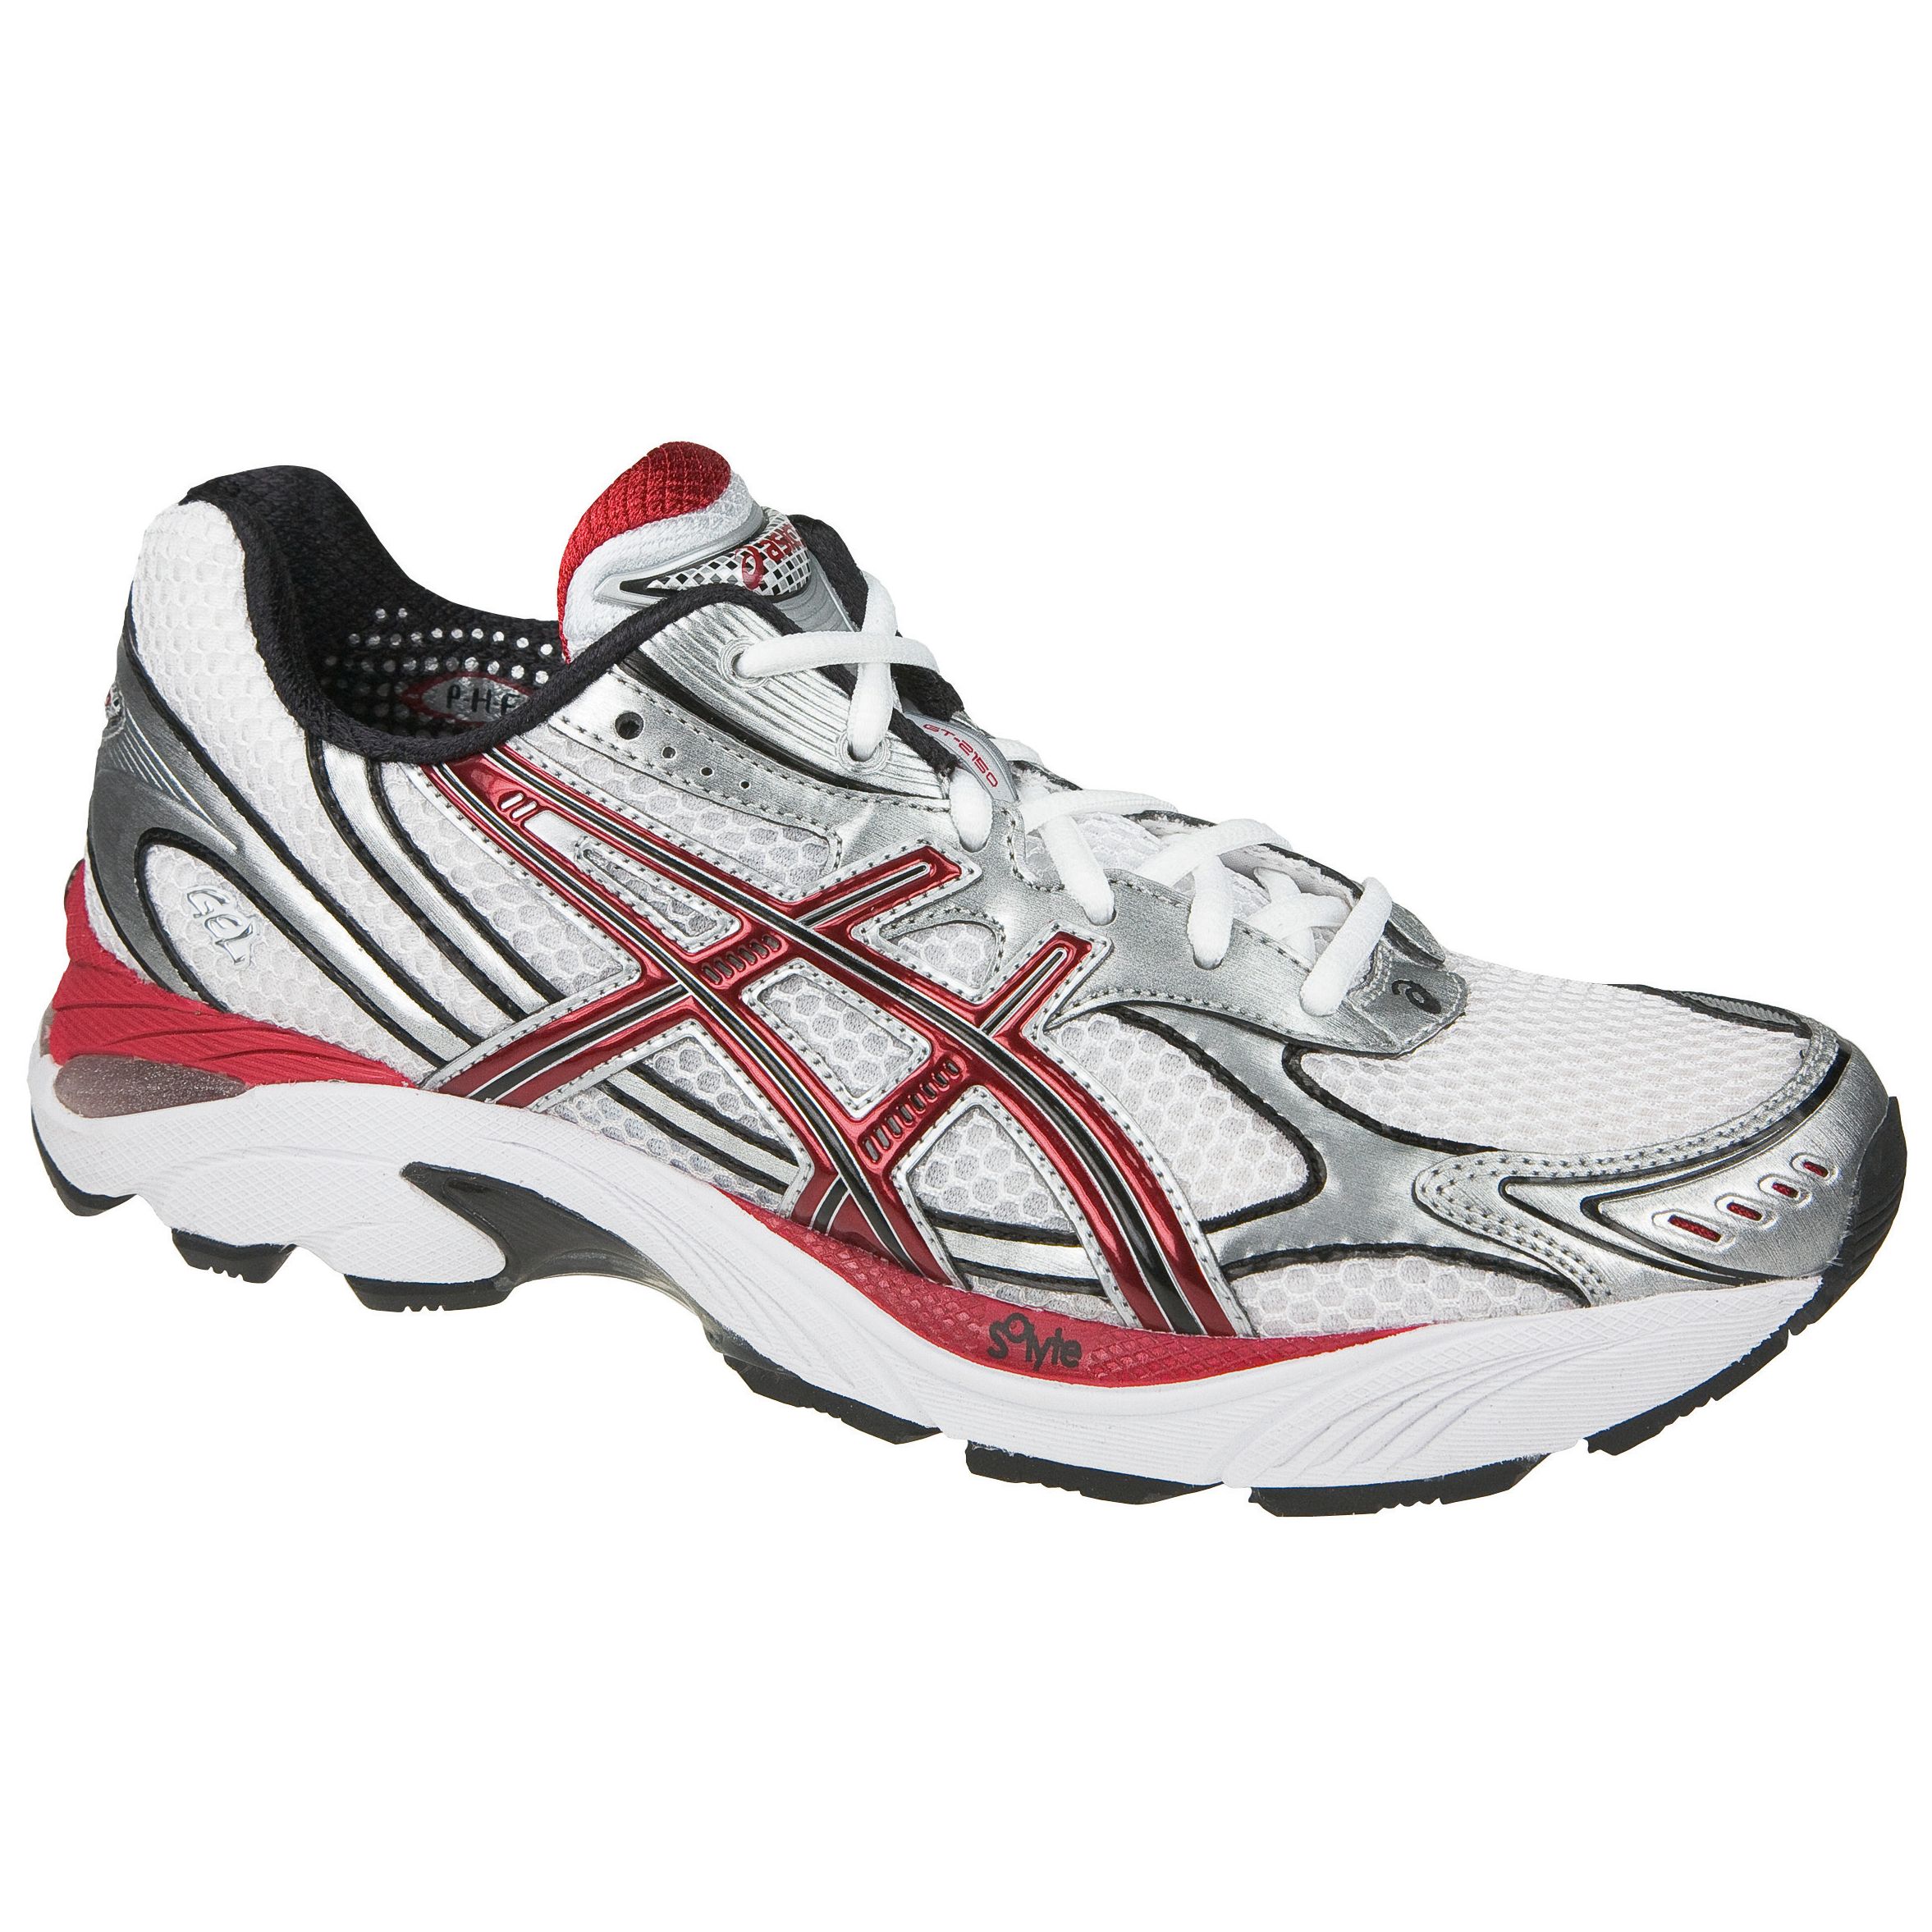 Asics GT2150 Running Shoes, White/red, 11.5